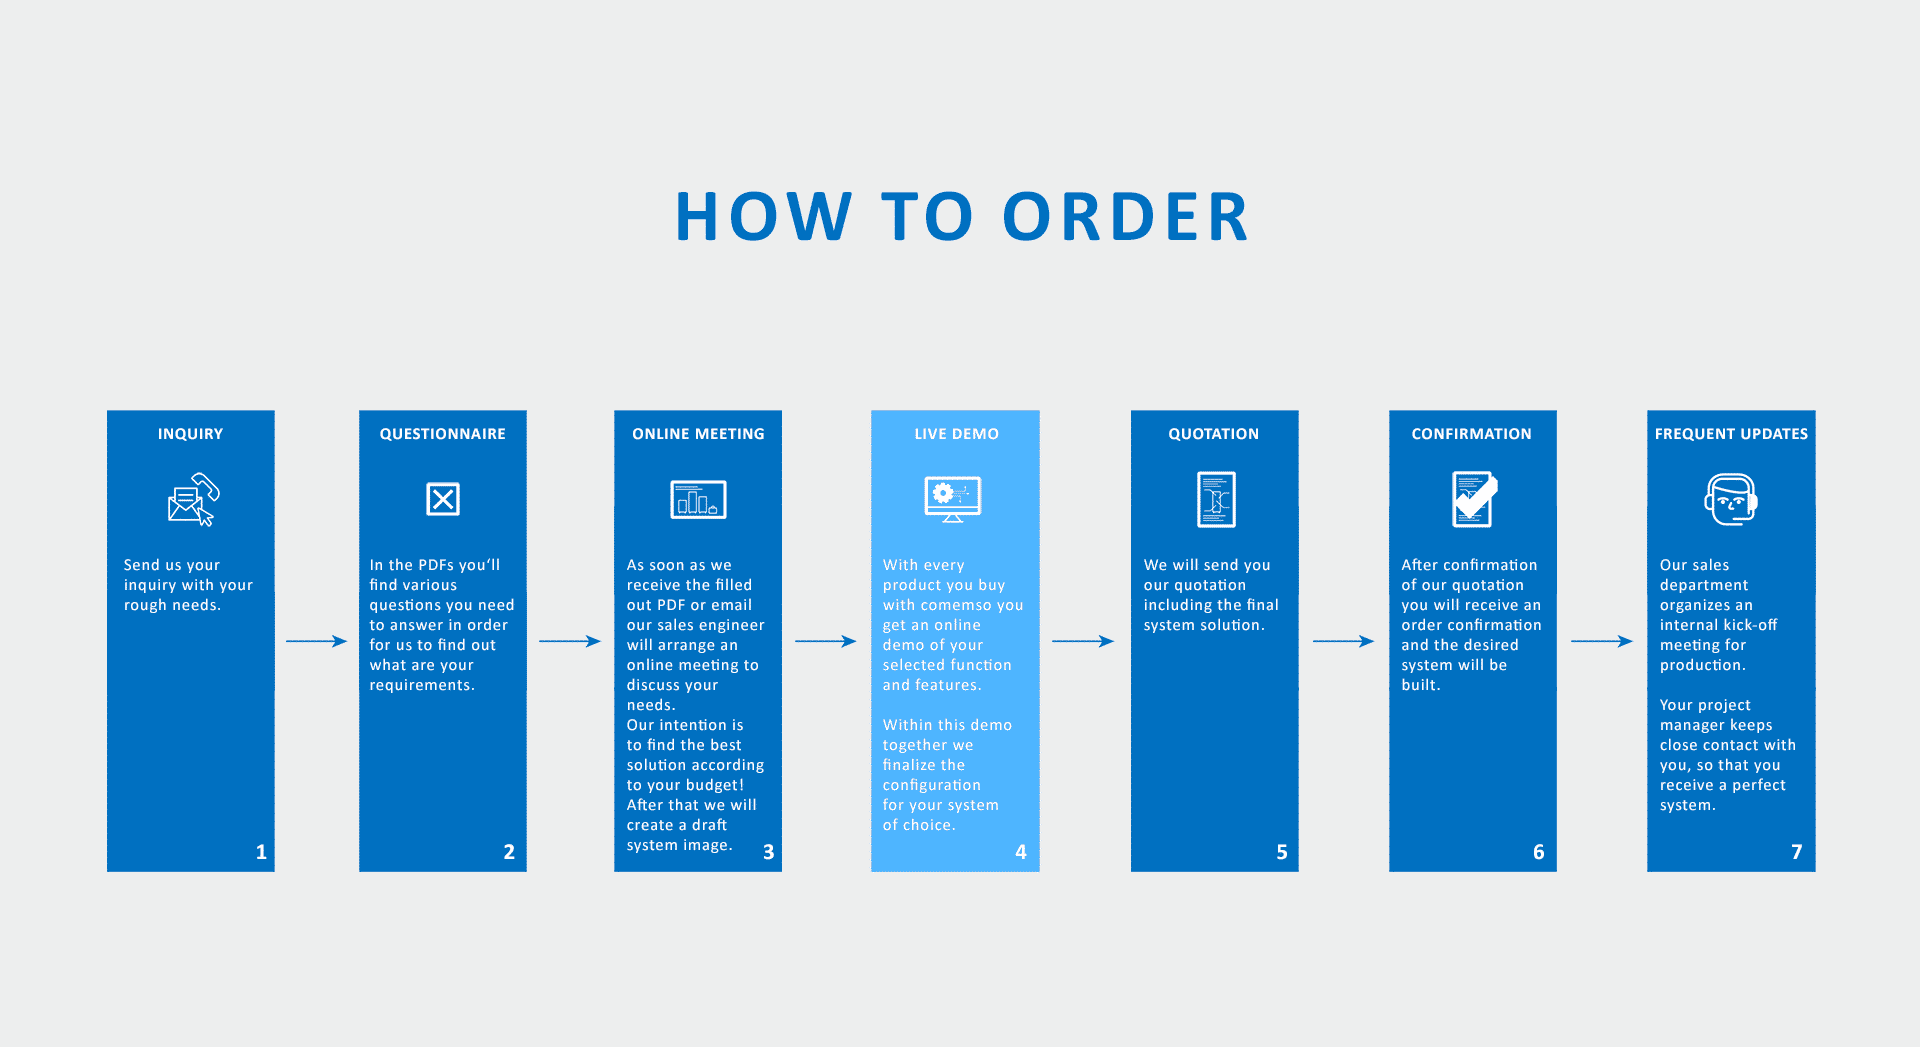 How to order 7 steps